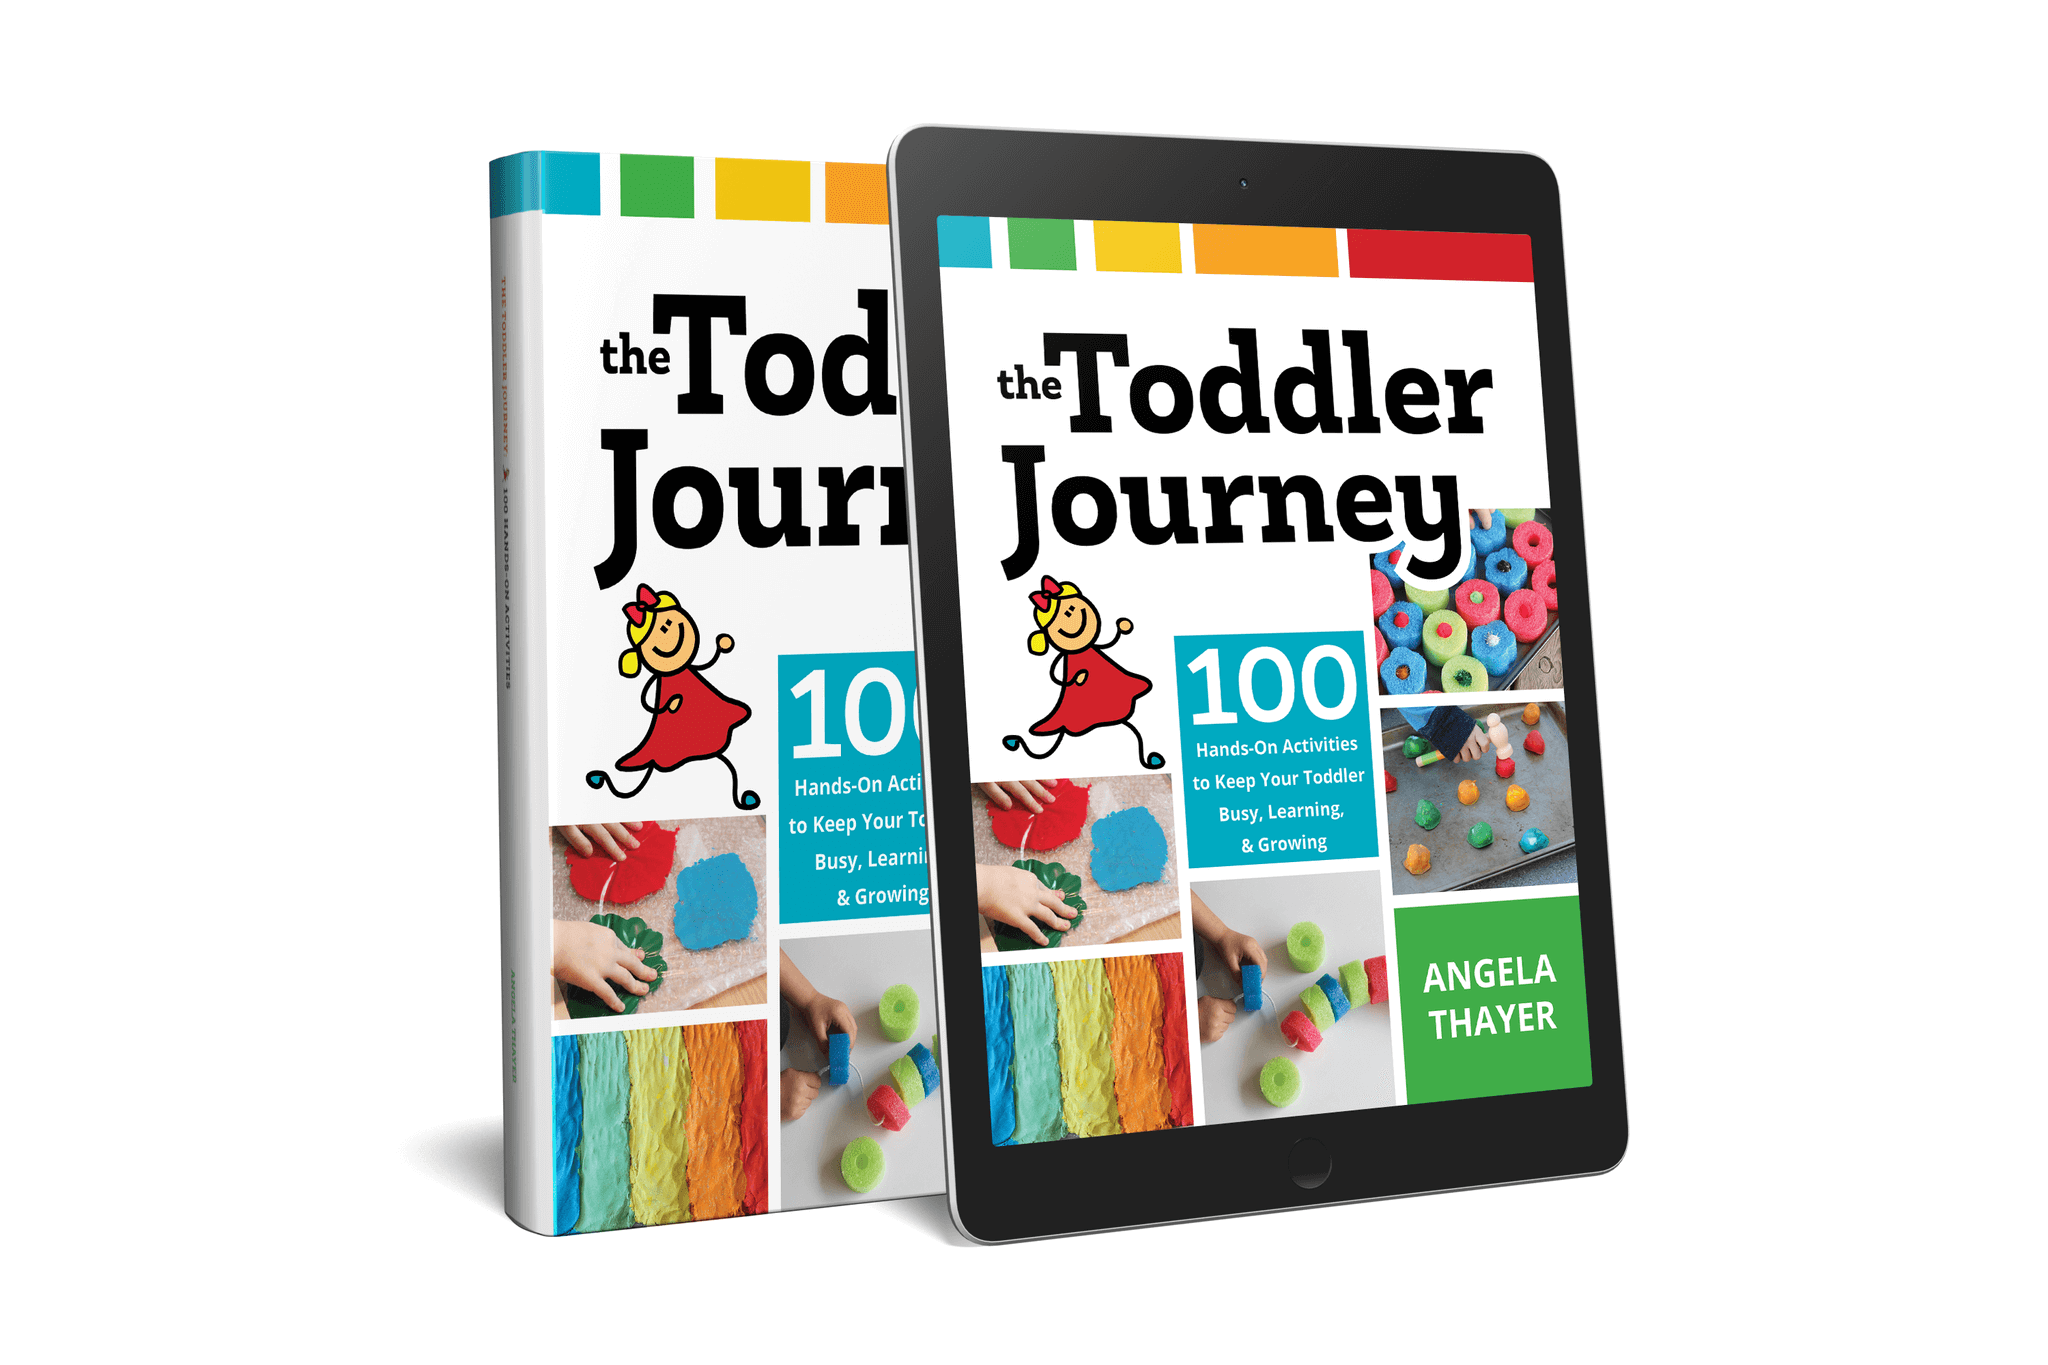 100 Hands-On Activities for Toddlers with The Toddler Journey